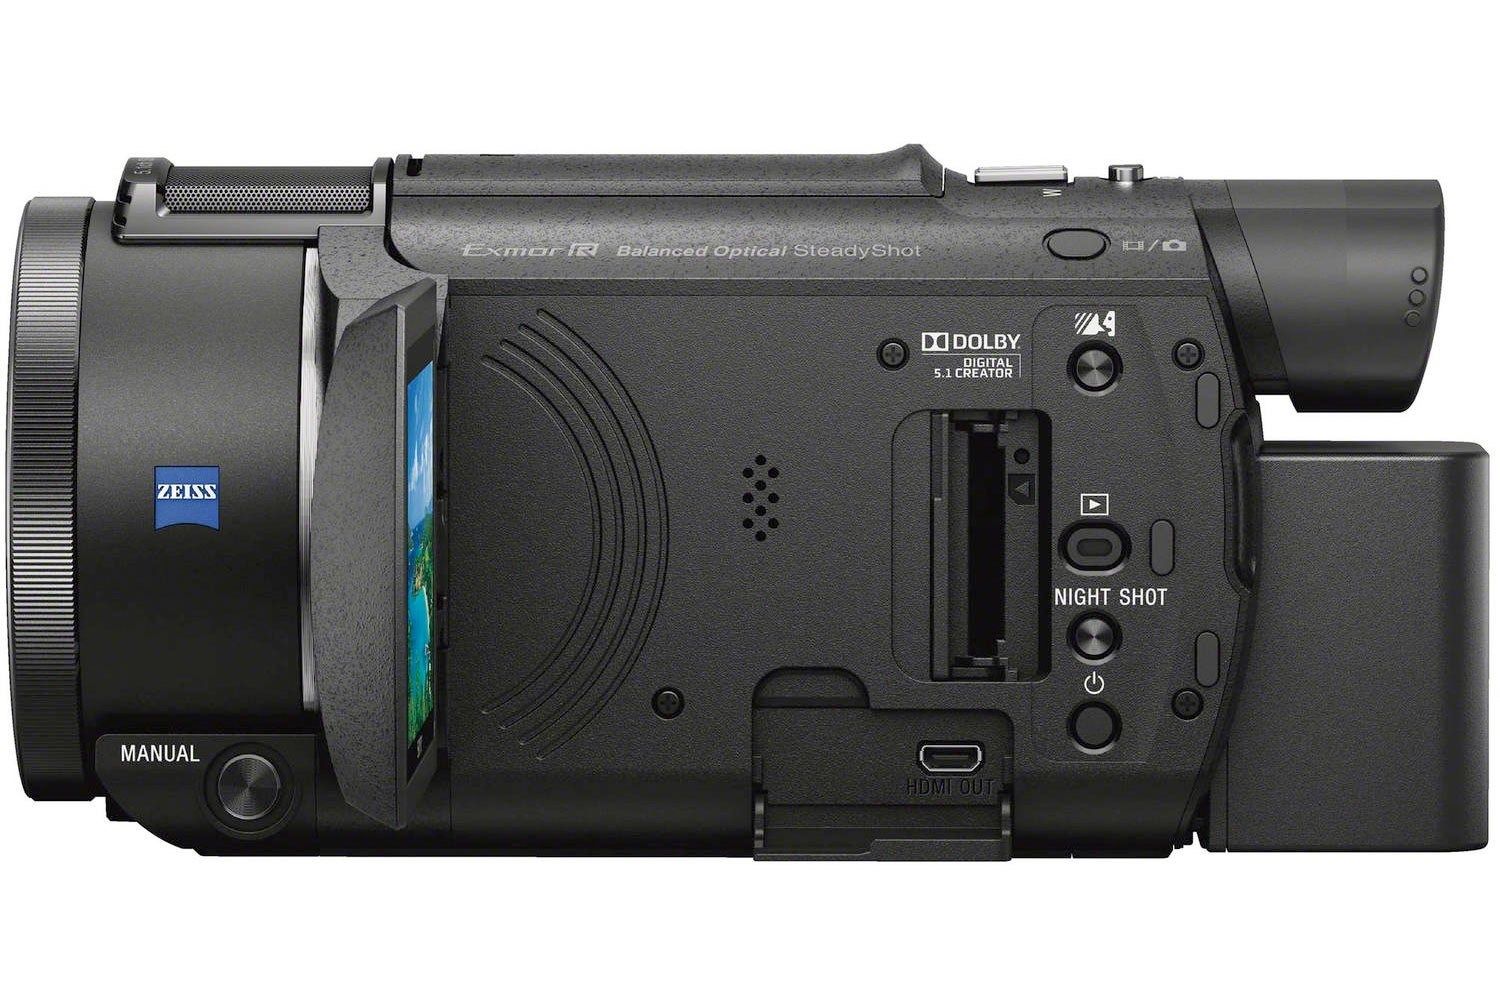 Sony Handycam Camcorder FDR-AX53, 4K, Ultra HD, (Black) Camera - Product Photo 2 - Side view of the camera unit with the controls visible and the screen extended